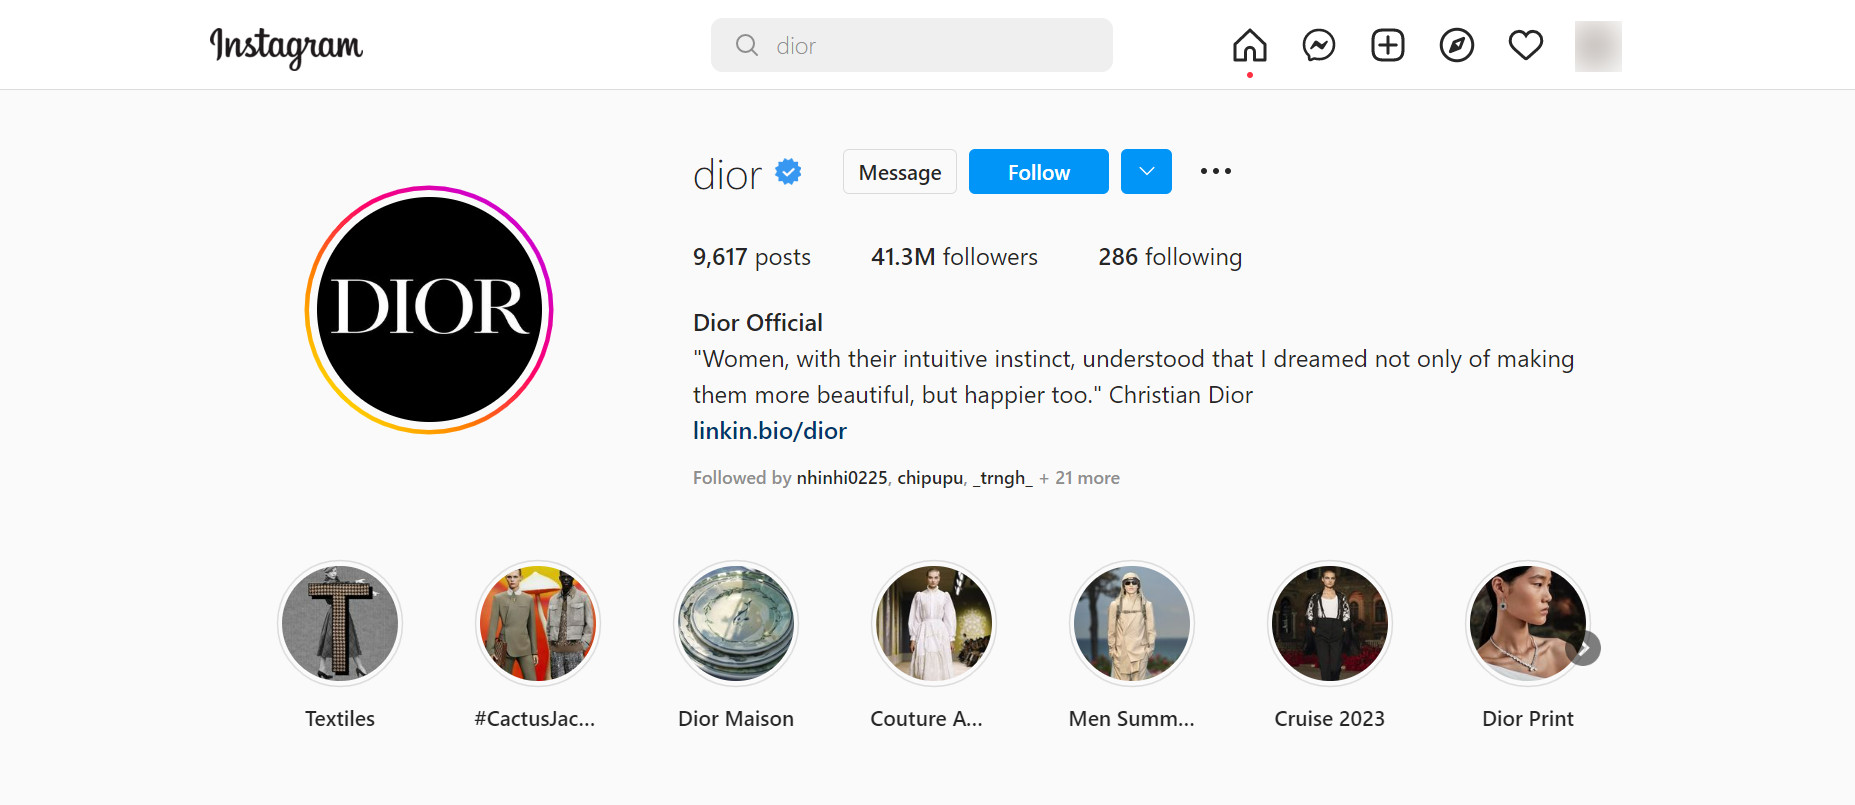 Dior shows how to organize their highlight cover for Instagram consistently